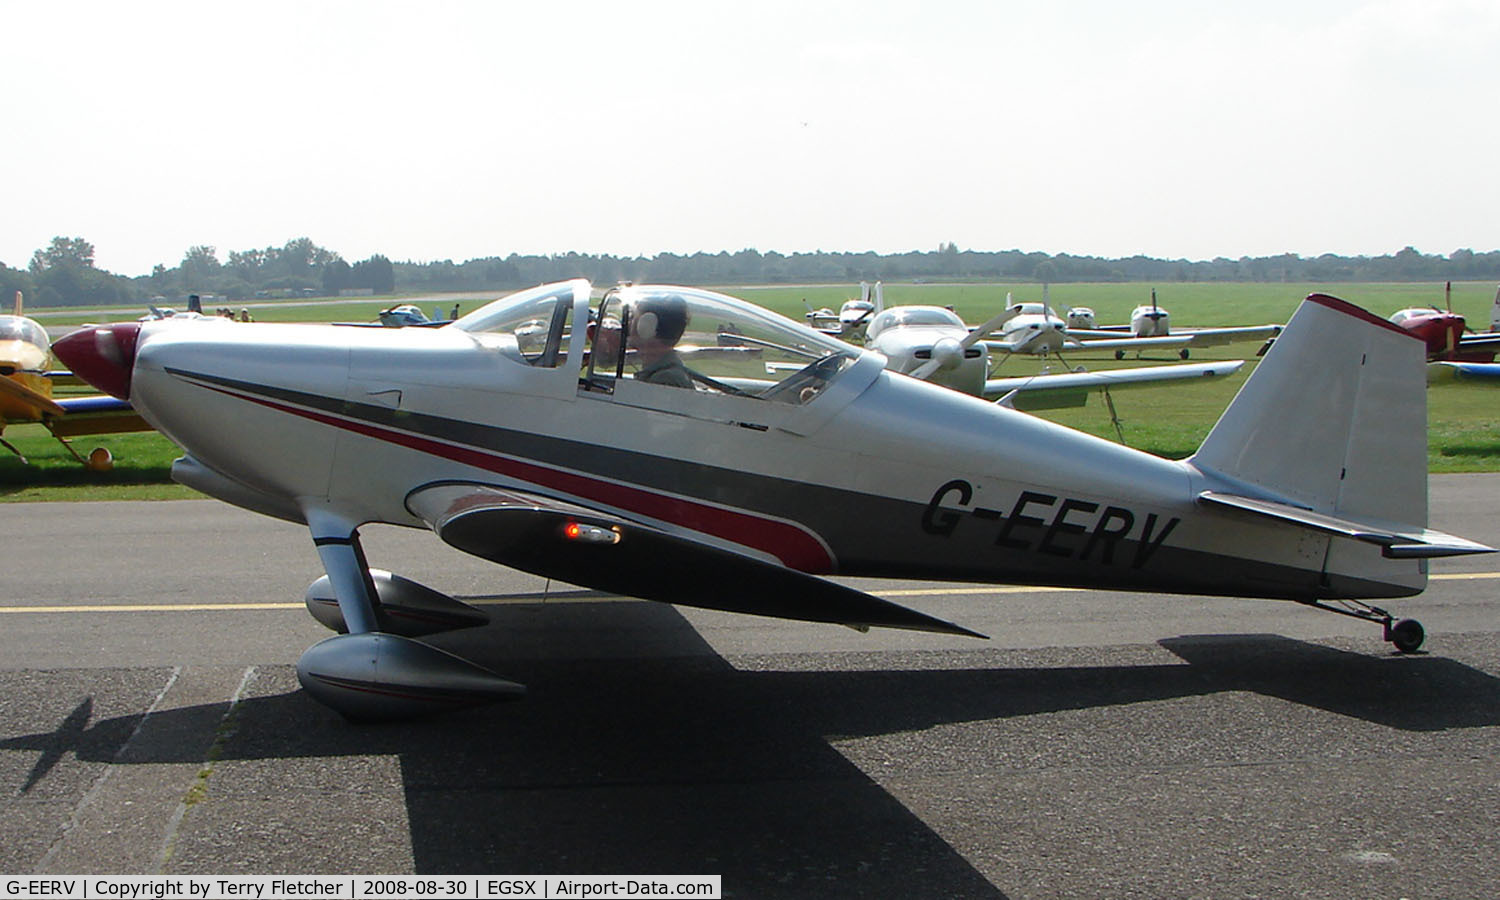 G-EERV, 2002 Vans RV-6 C/N PFA 181A-13381, Participant in the 2008 RV Fly-in at North Weald Uk